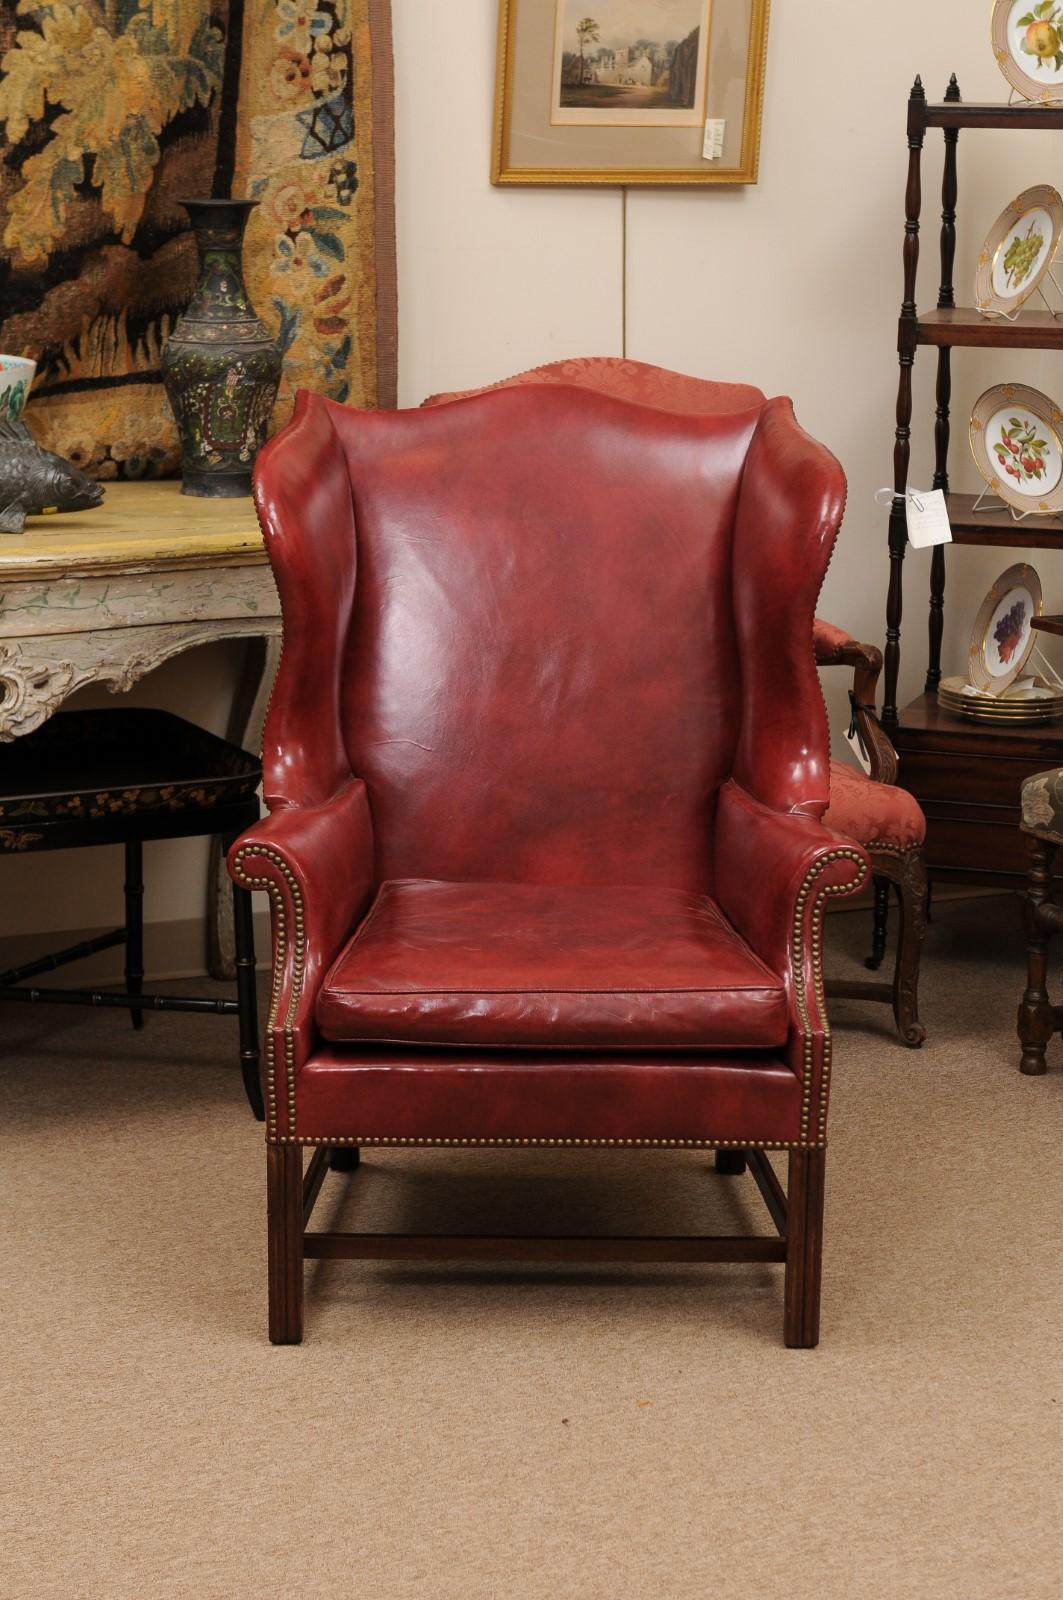 20th Century English Wing Chair in Mahogany & Red Leather Upholstery with Brass  For Sale 2